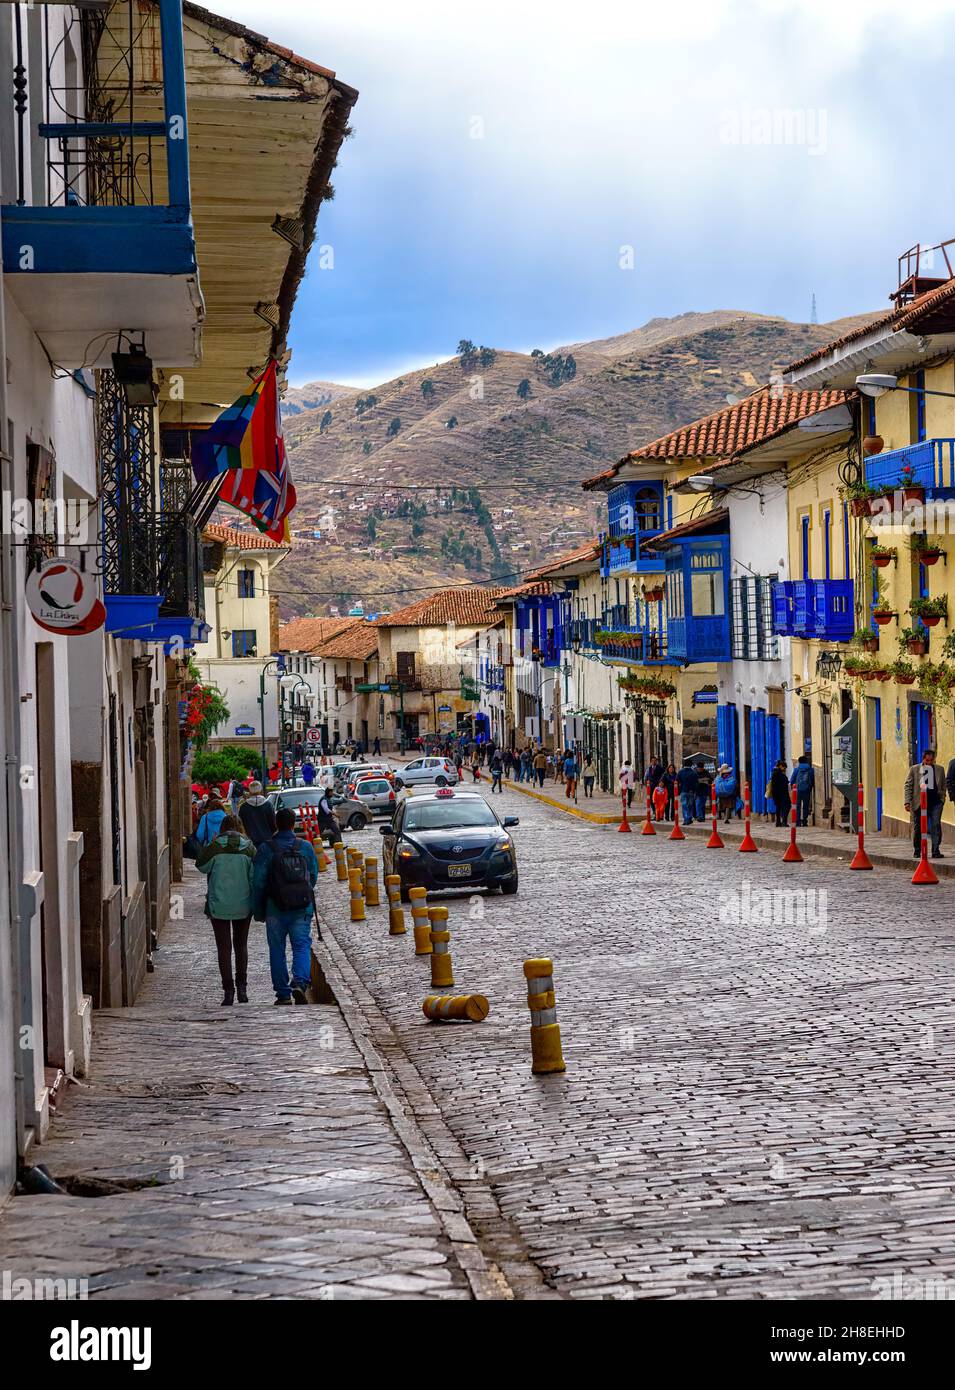 Cusco Street with characteristic Blue Windows, Shutters and Balconies Stock Photo